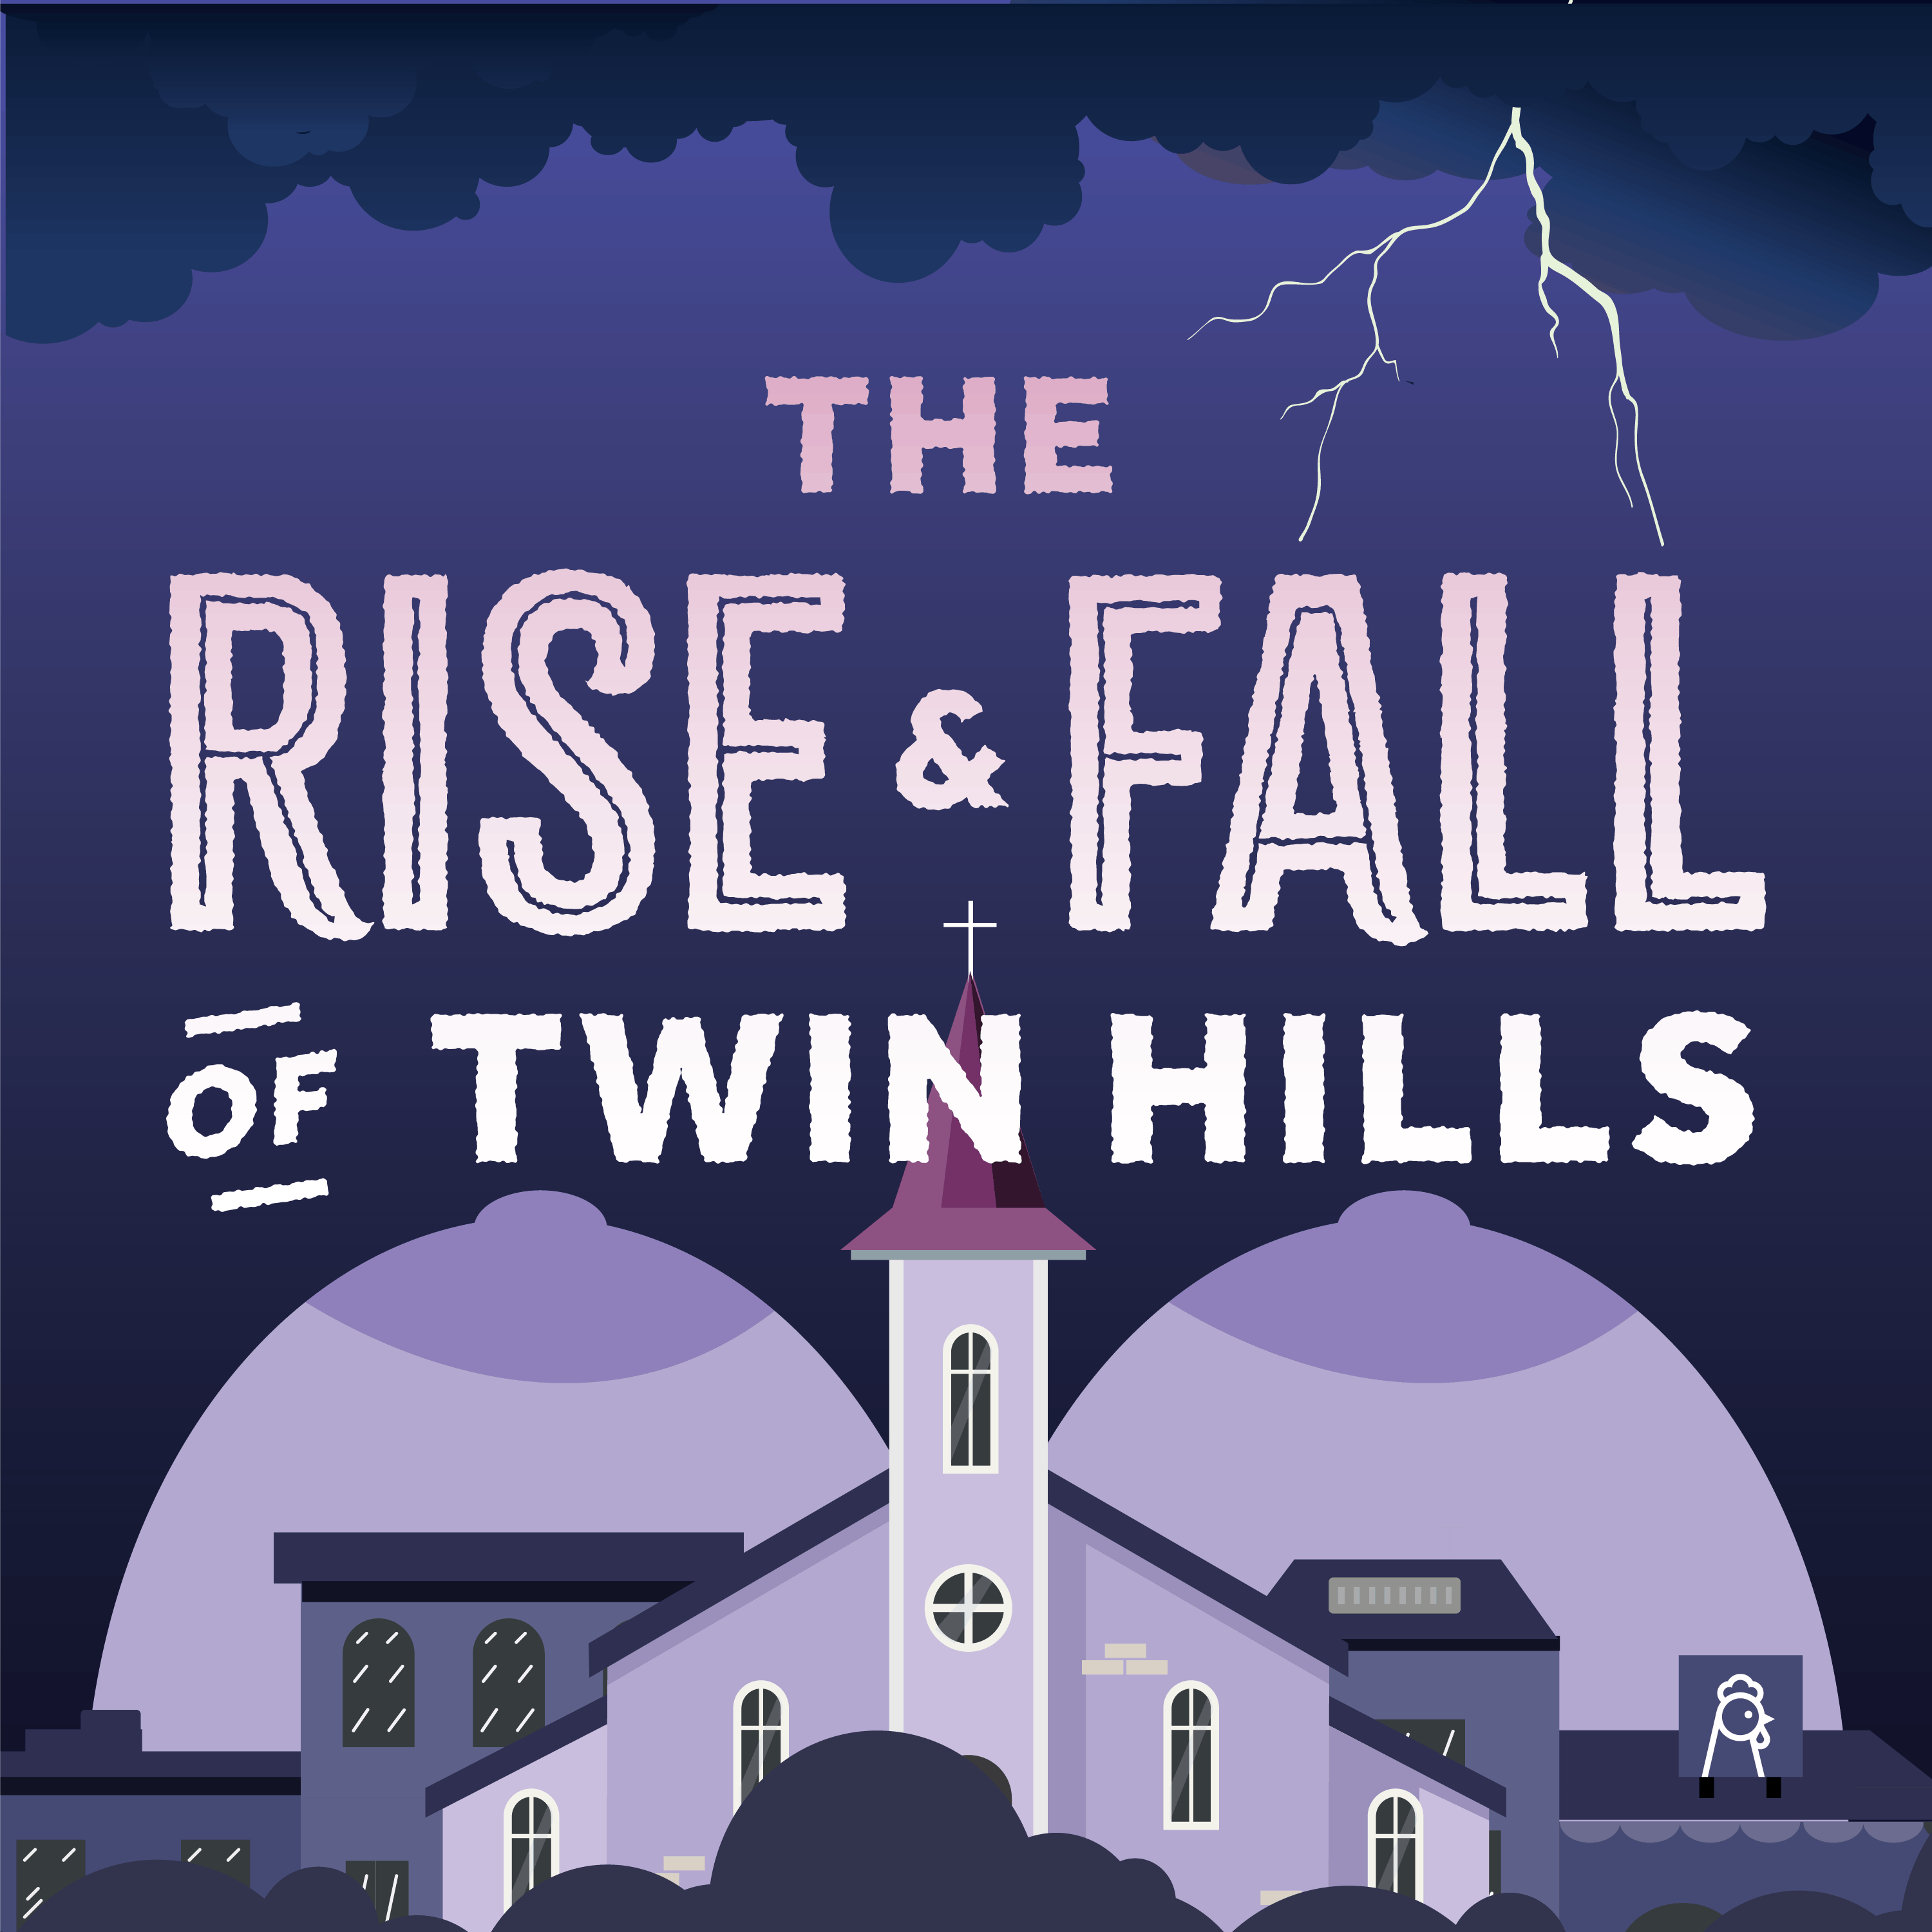 Part 1: The Rise and Fall of Twin Hills ”Of Milk & Miracles”